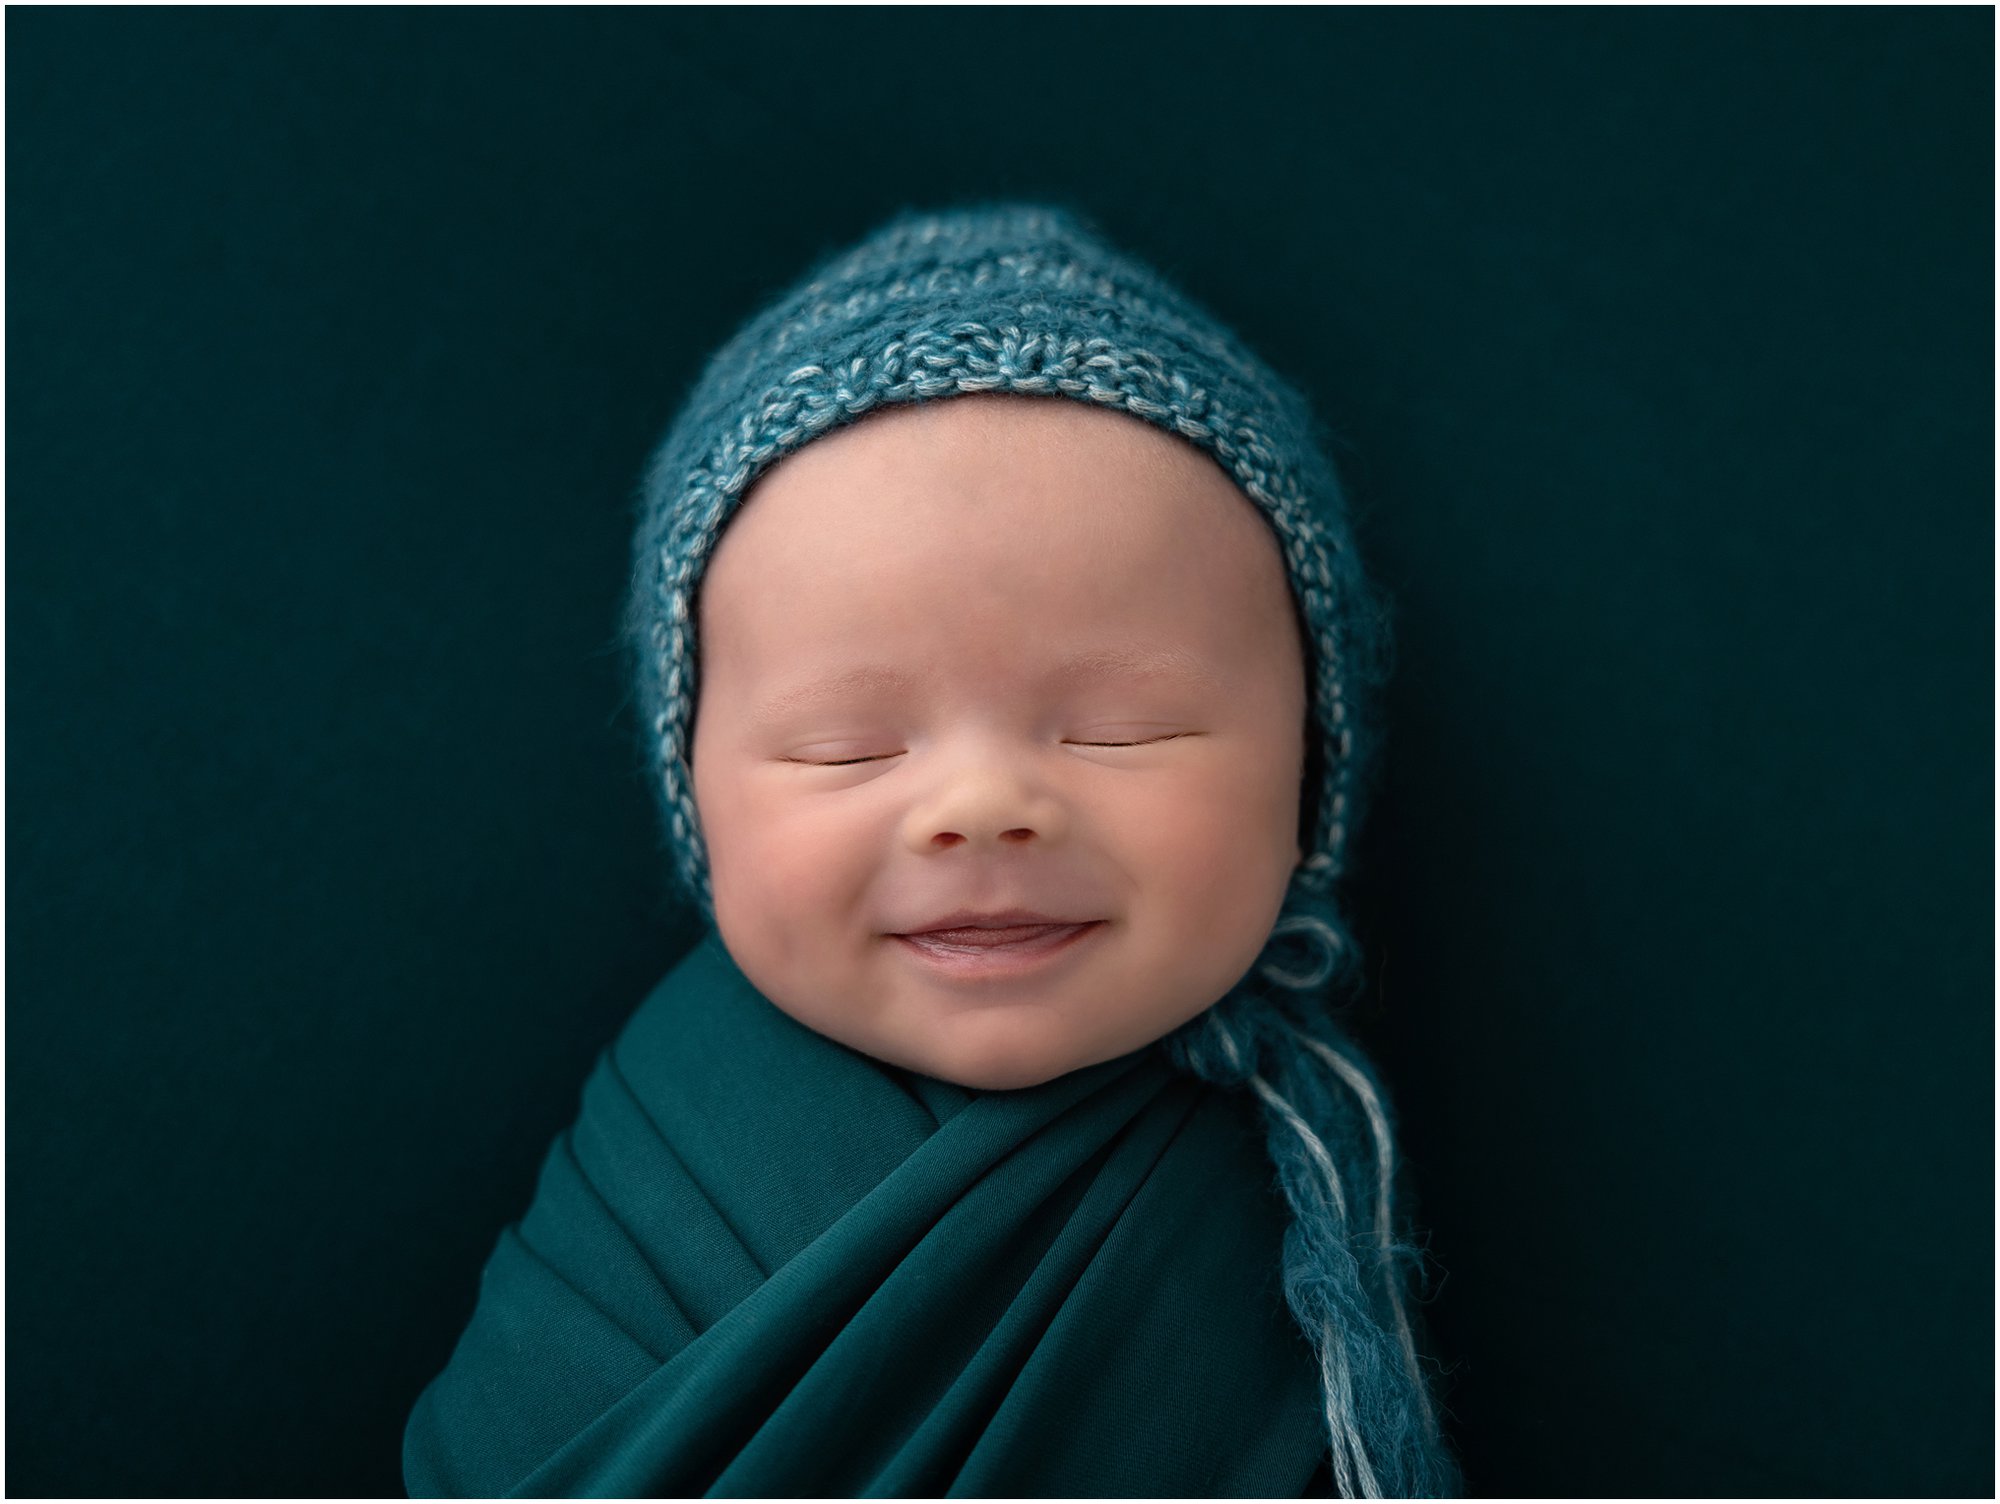 Newborn baby smiles while wearing an emerald green bonnet and wrap on a emerald green blanket